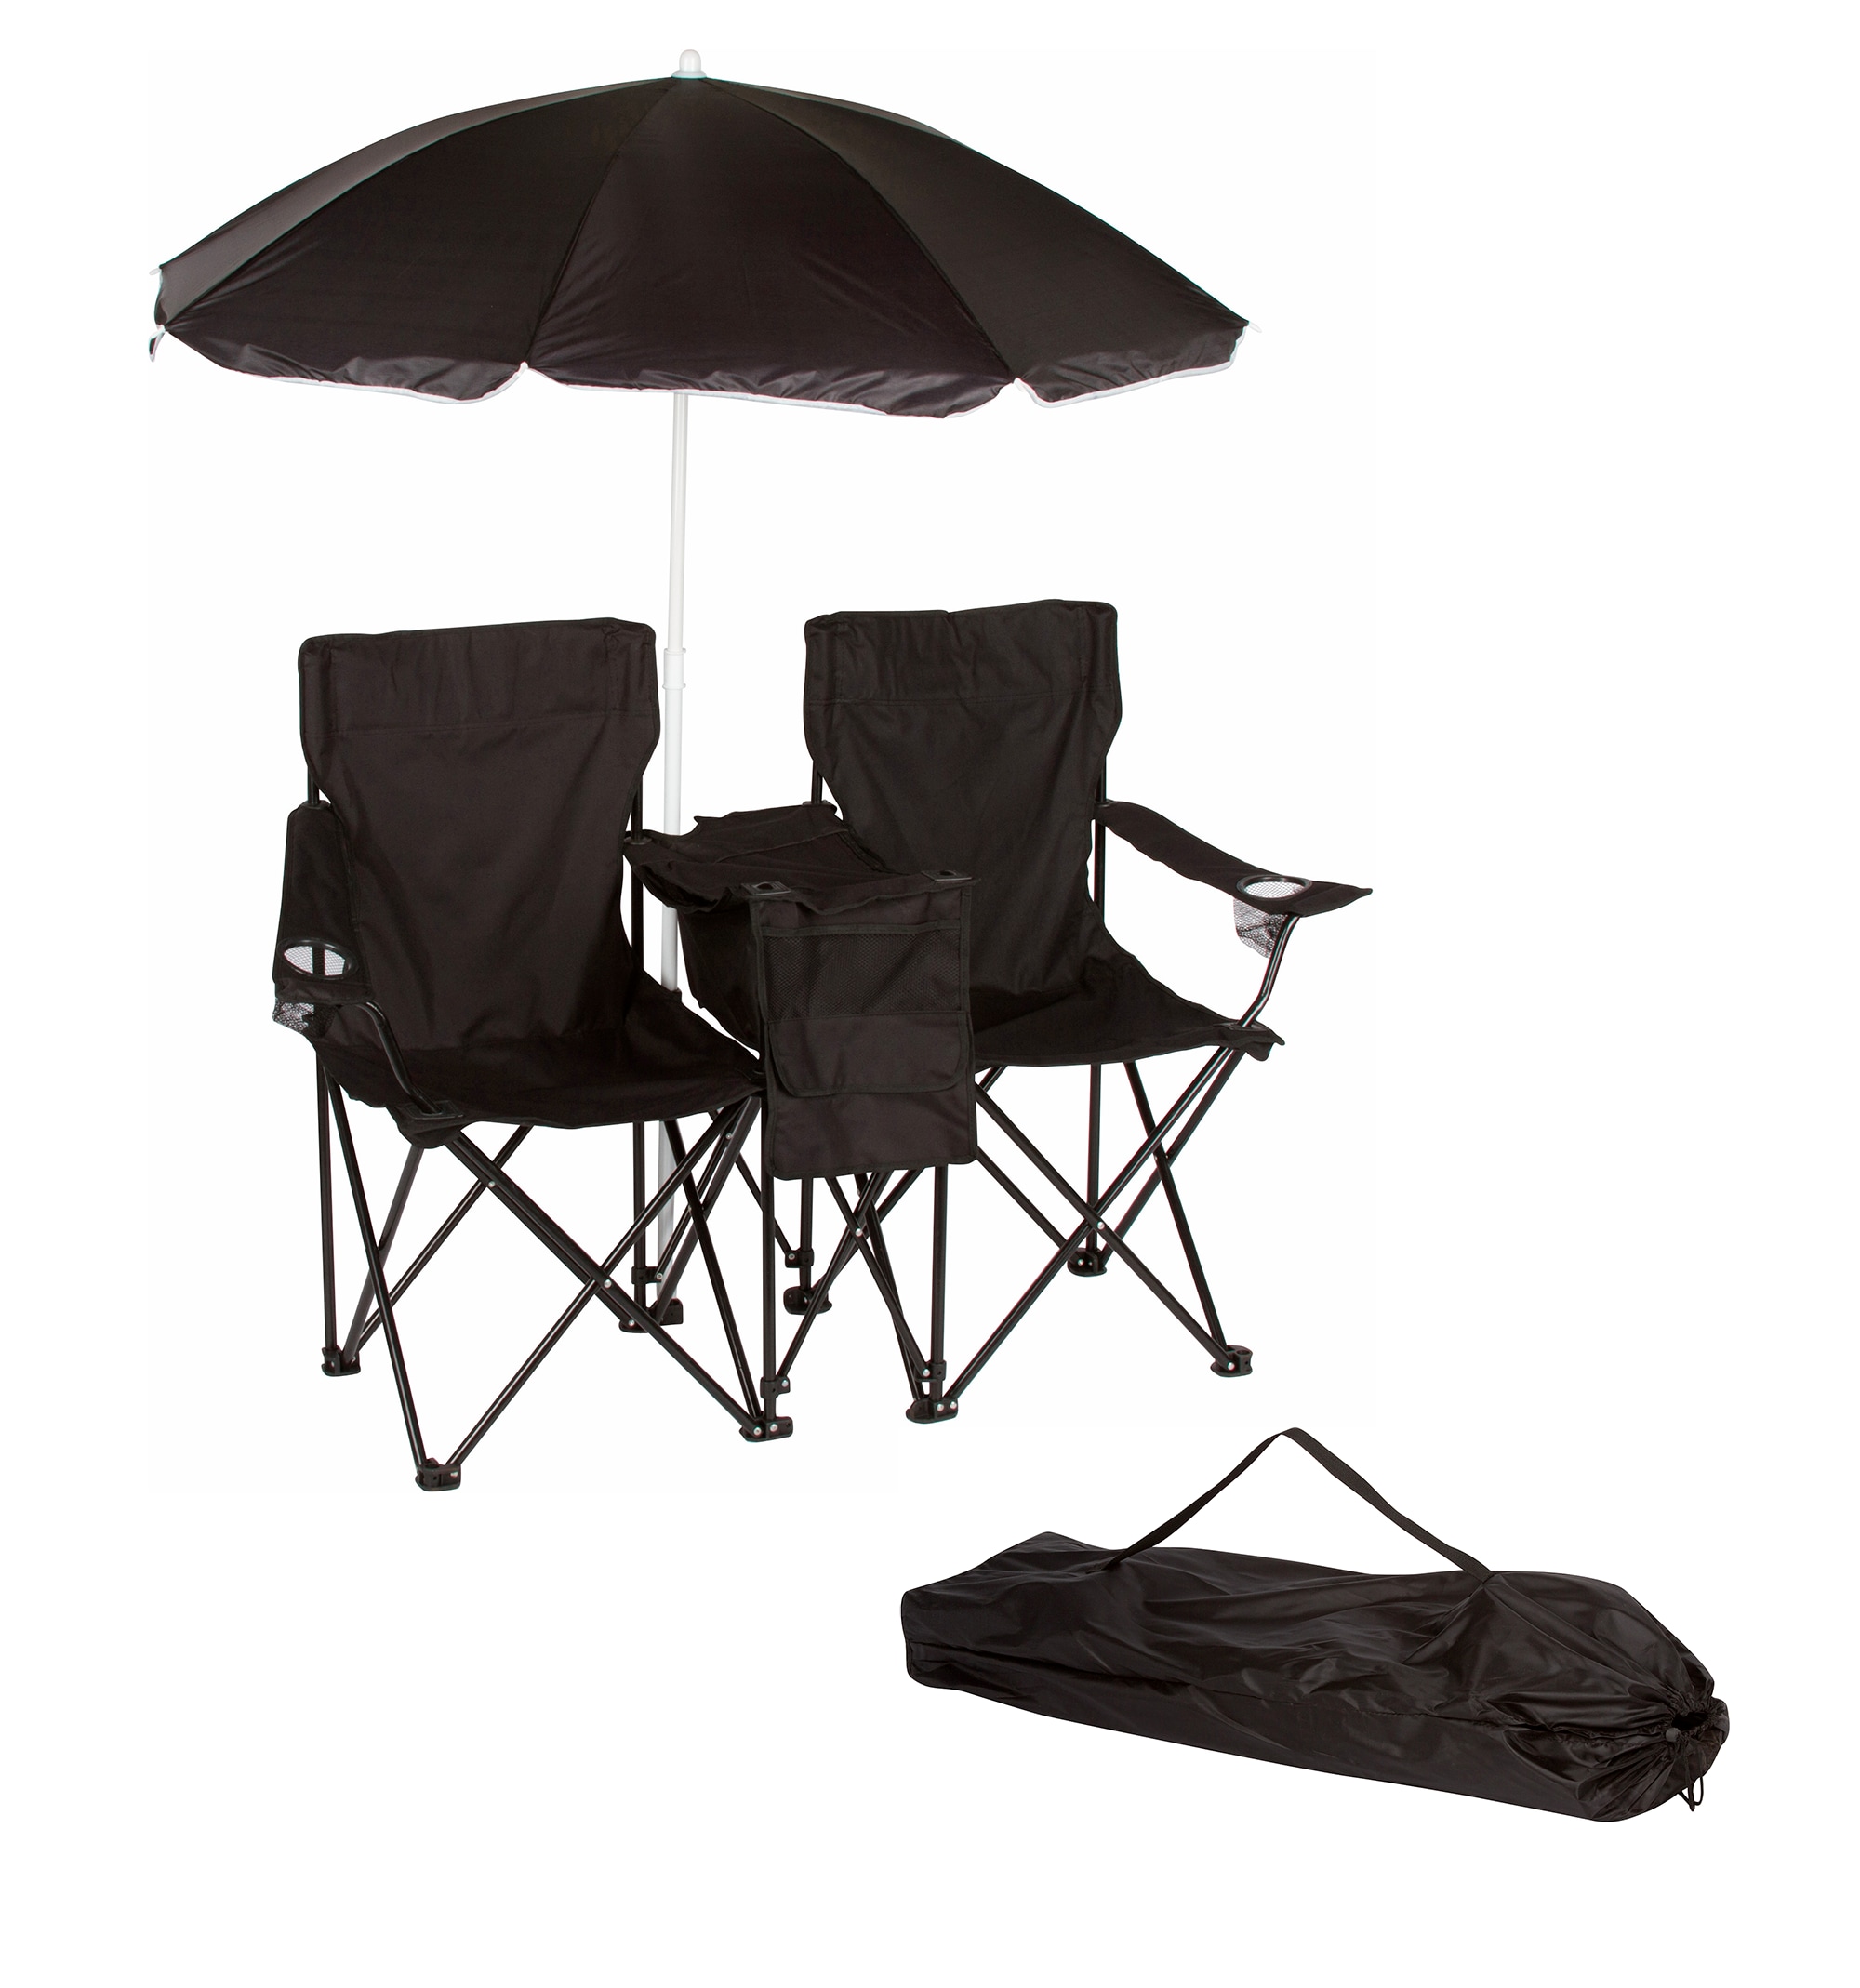 Folding Camping Chair With Canopy For Outdoor Garden Fishing Beach Sunshade Set 